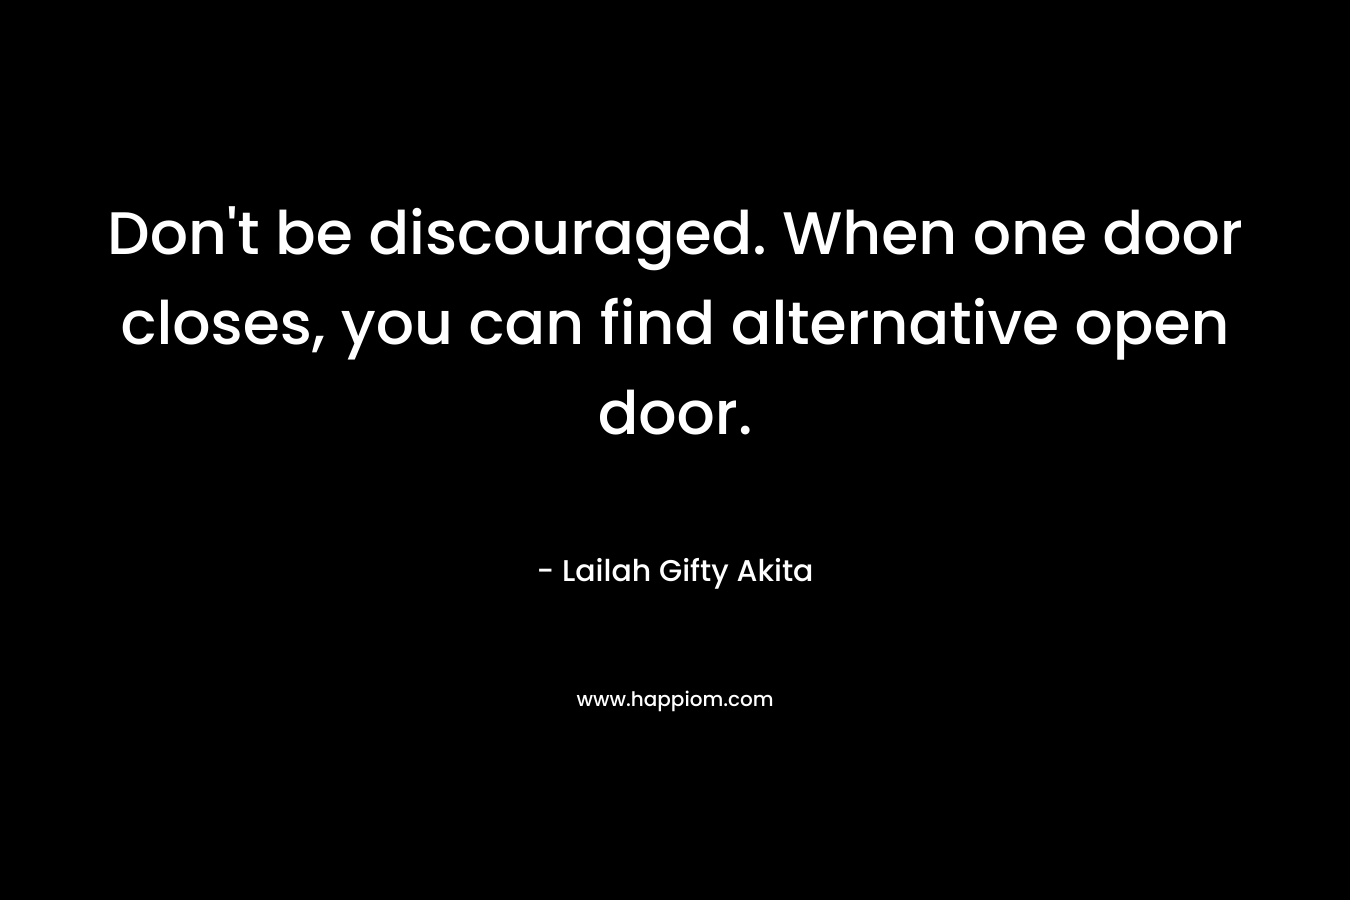 Don't be discouraged. When one door closes, you can find alternative open door.